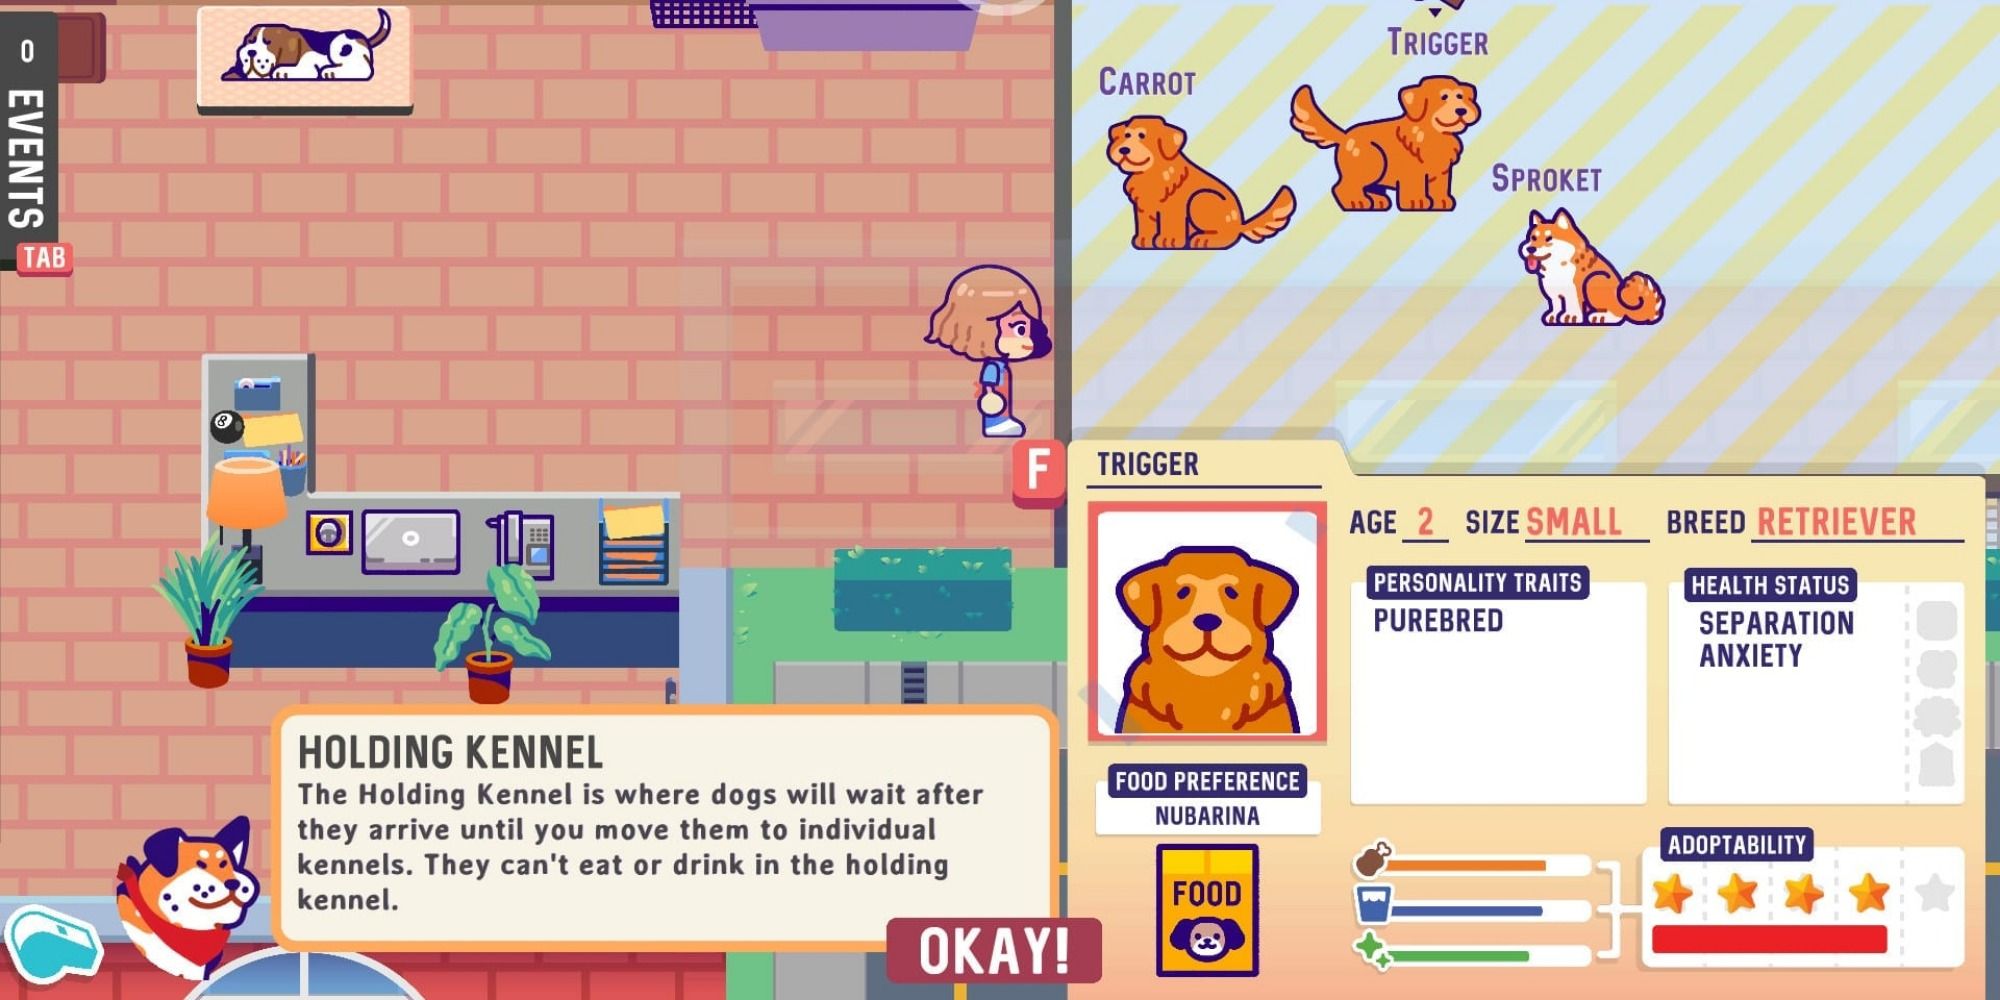 Holding kennel tutorial screen with three dogs and stats for a dog named Trigger